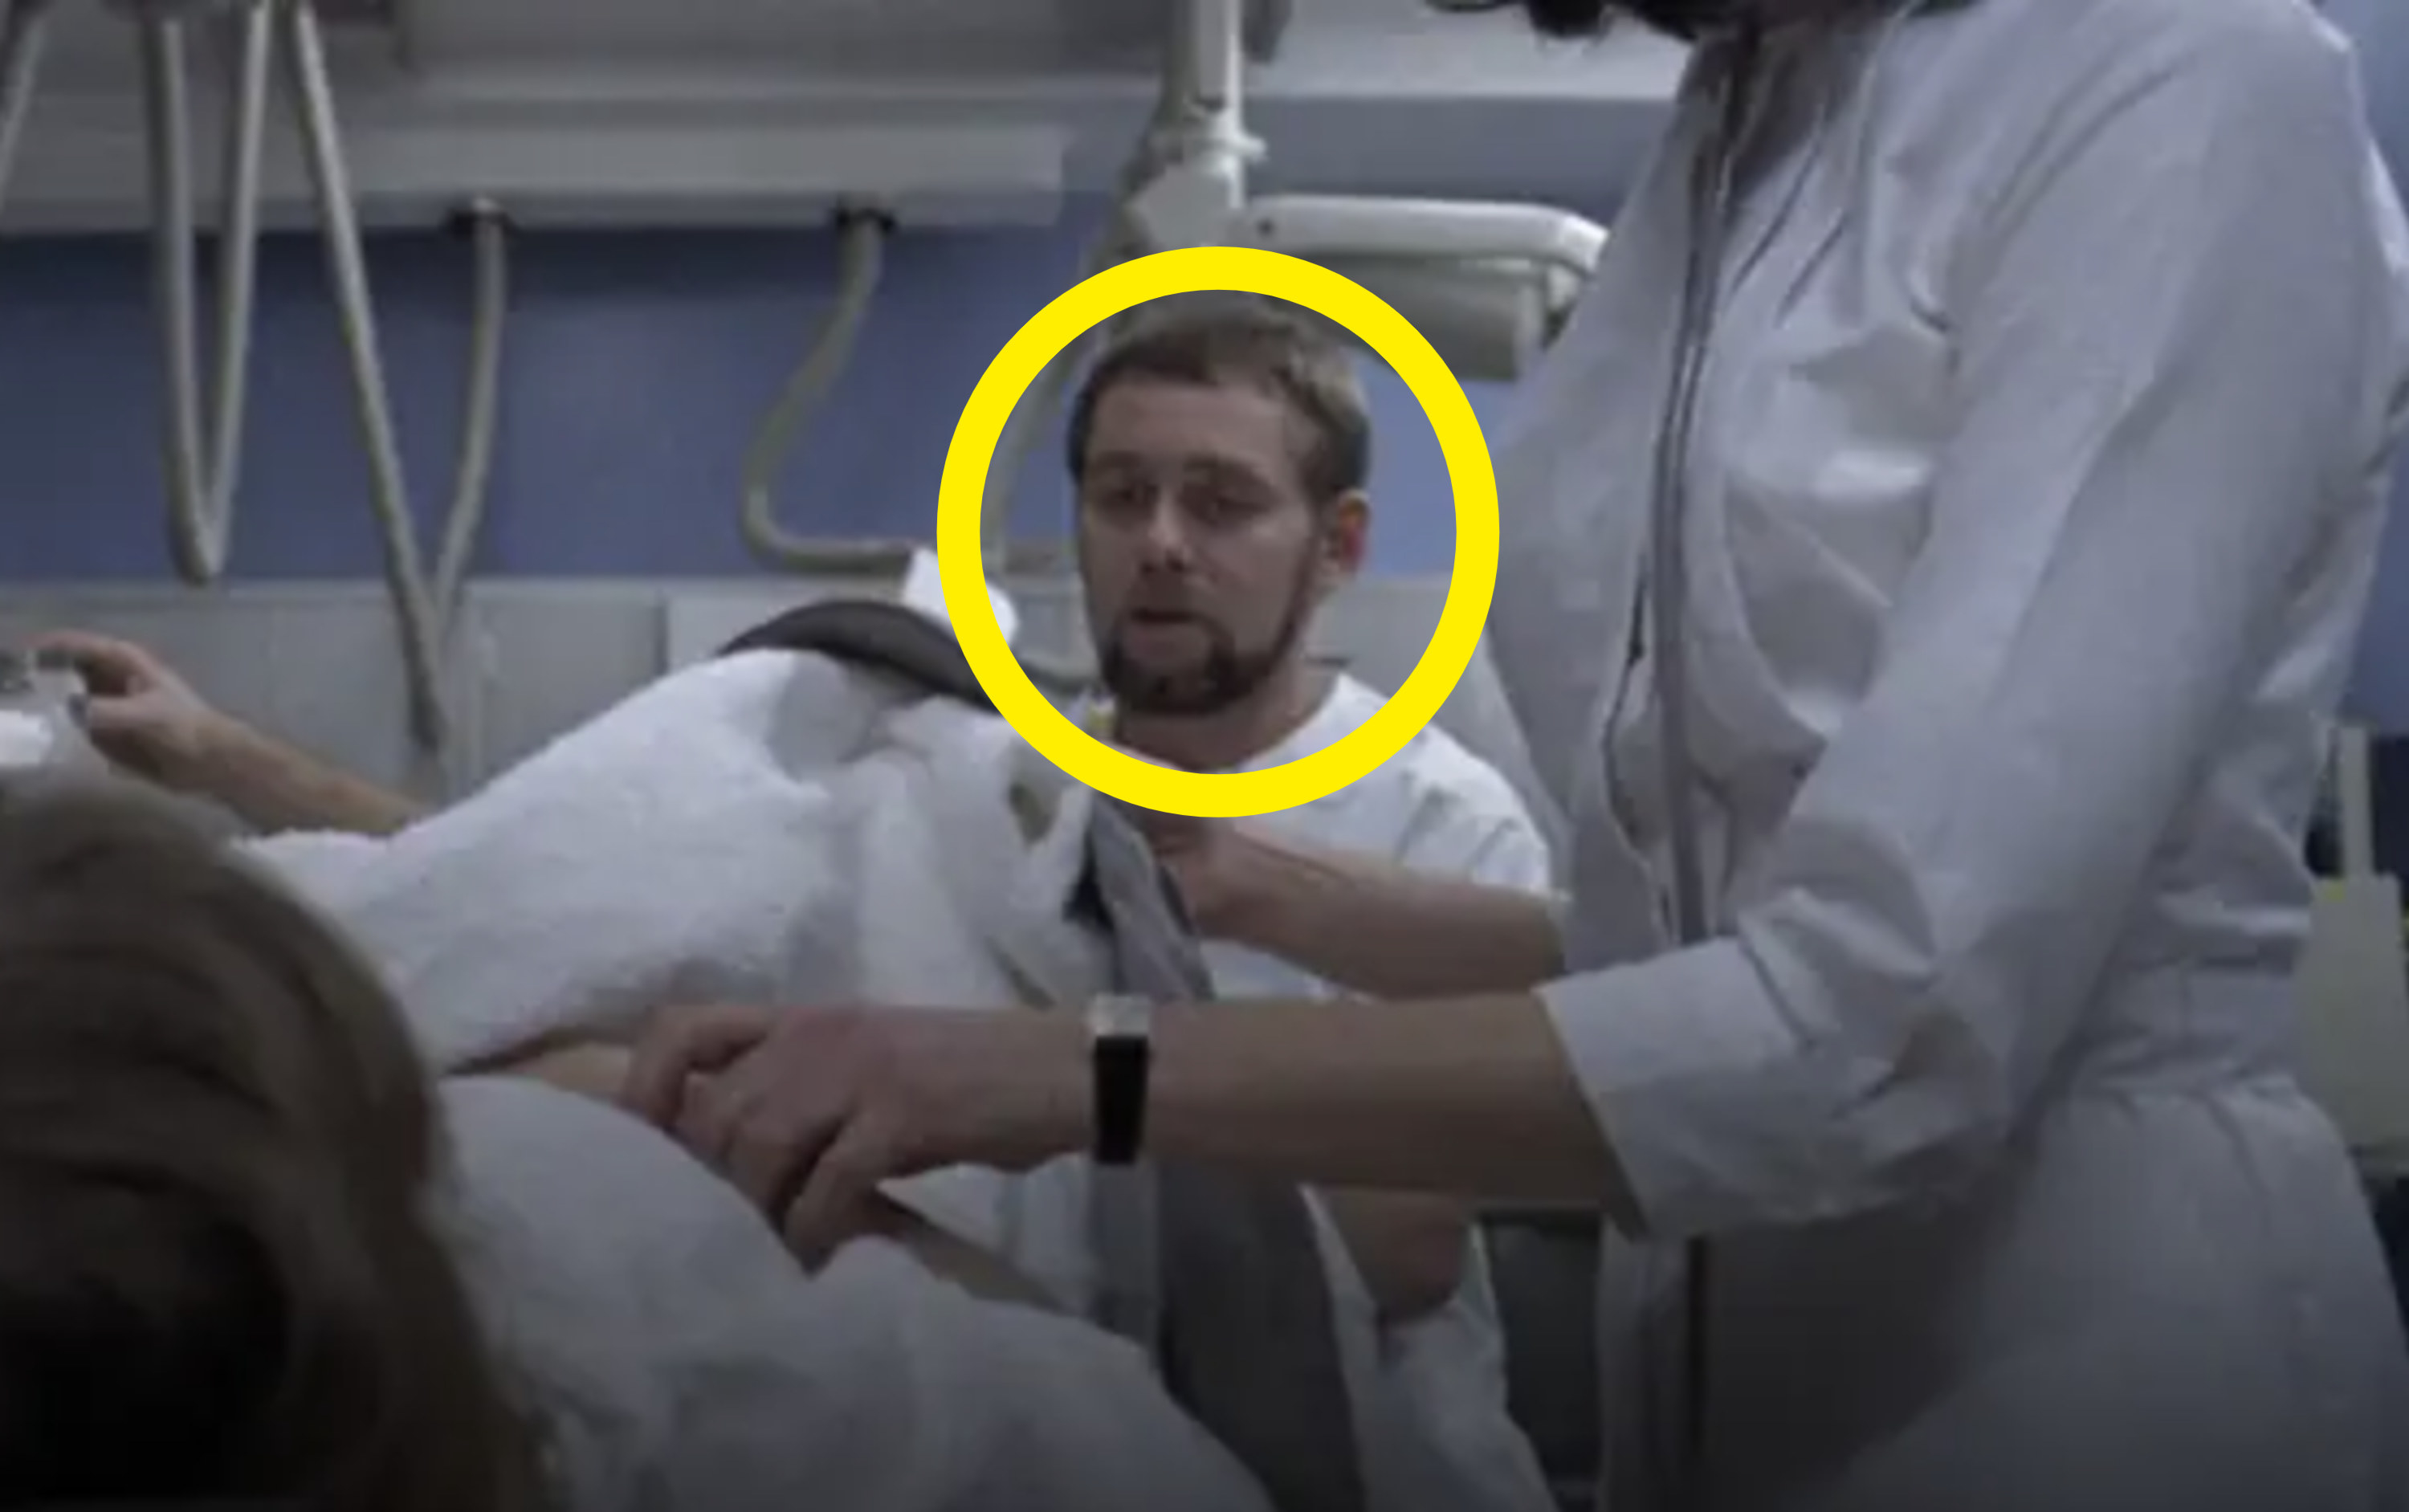 A man&#x27;s face circled in a hospital scene